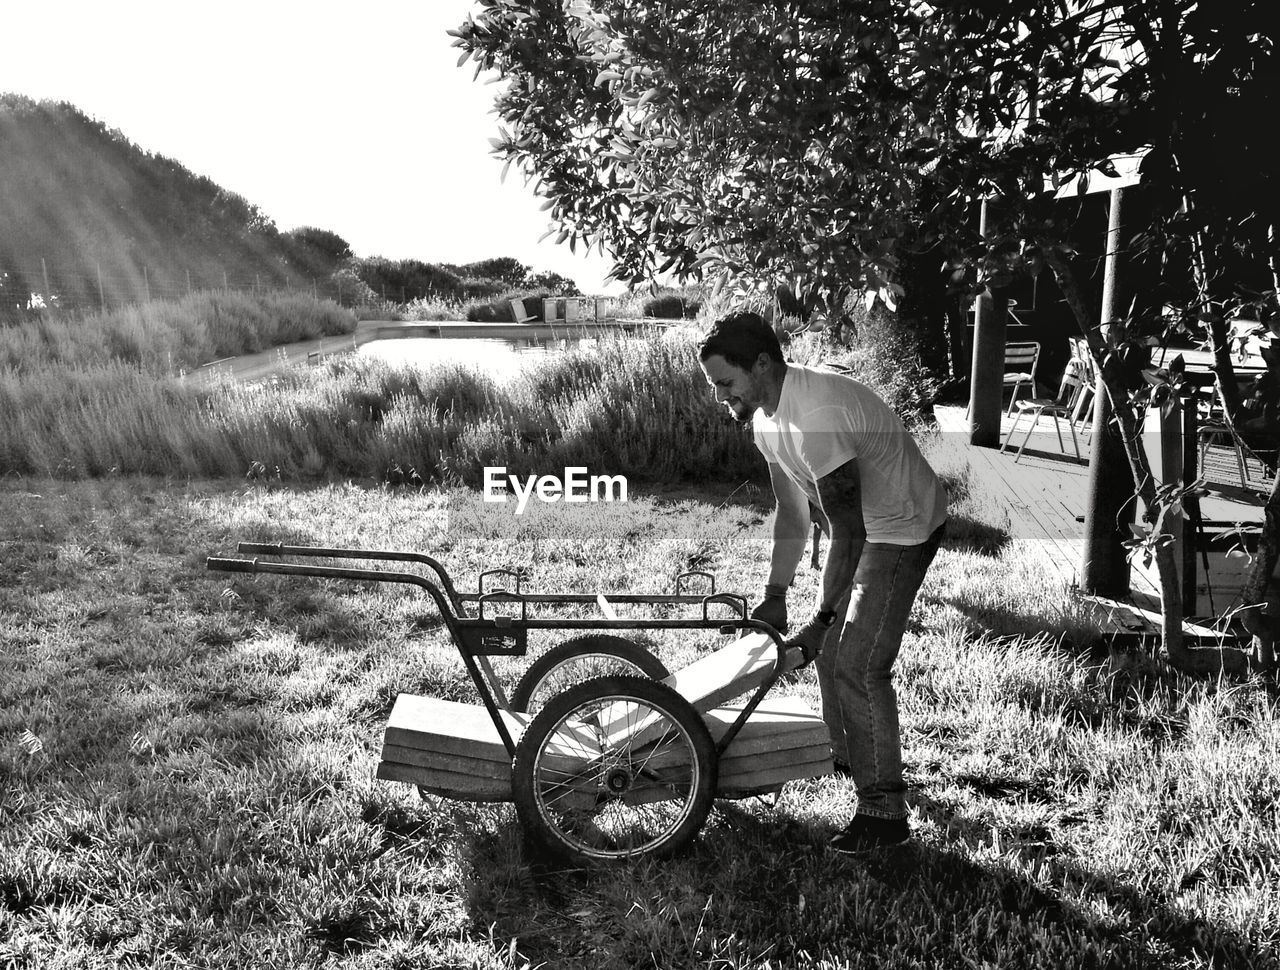 Side view of young man placing tiles on push cart at grassy field